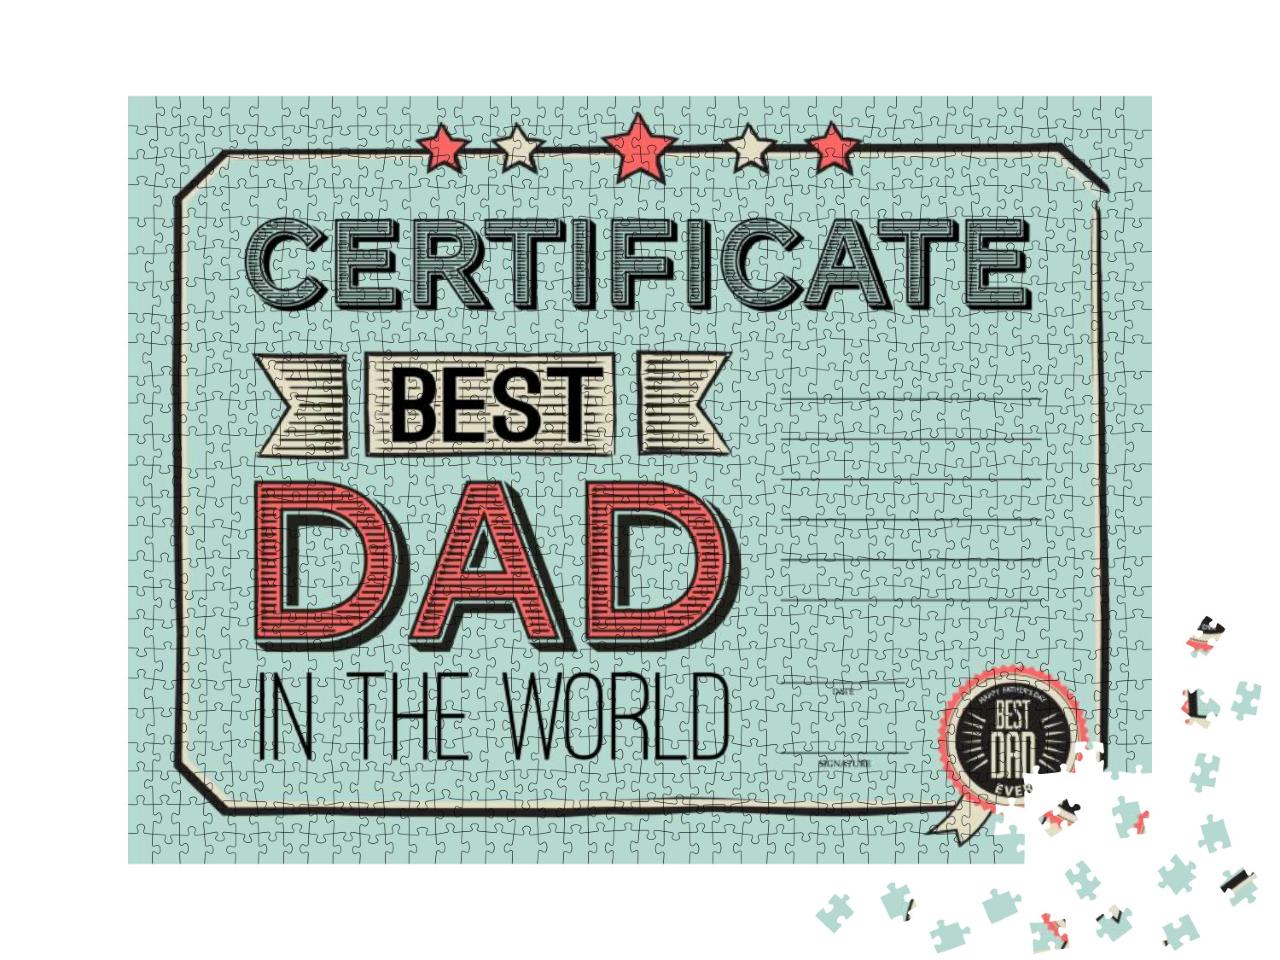 Template Diploma Congratulations for Fathers Day... Jigsaw Puzzle with 1000 pieces